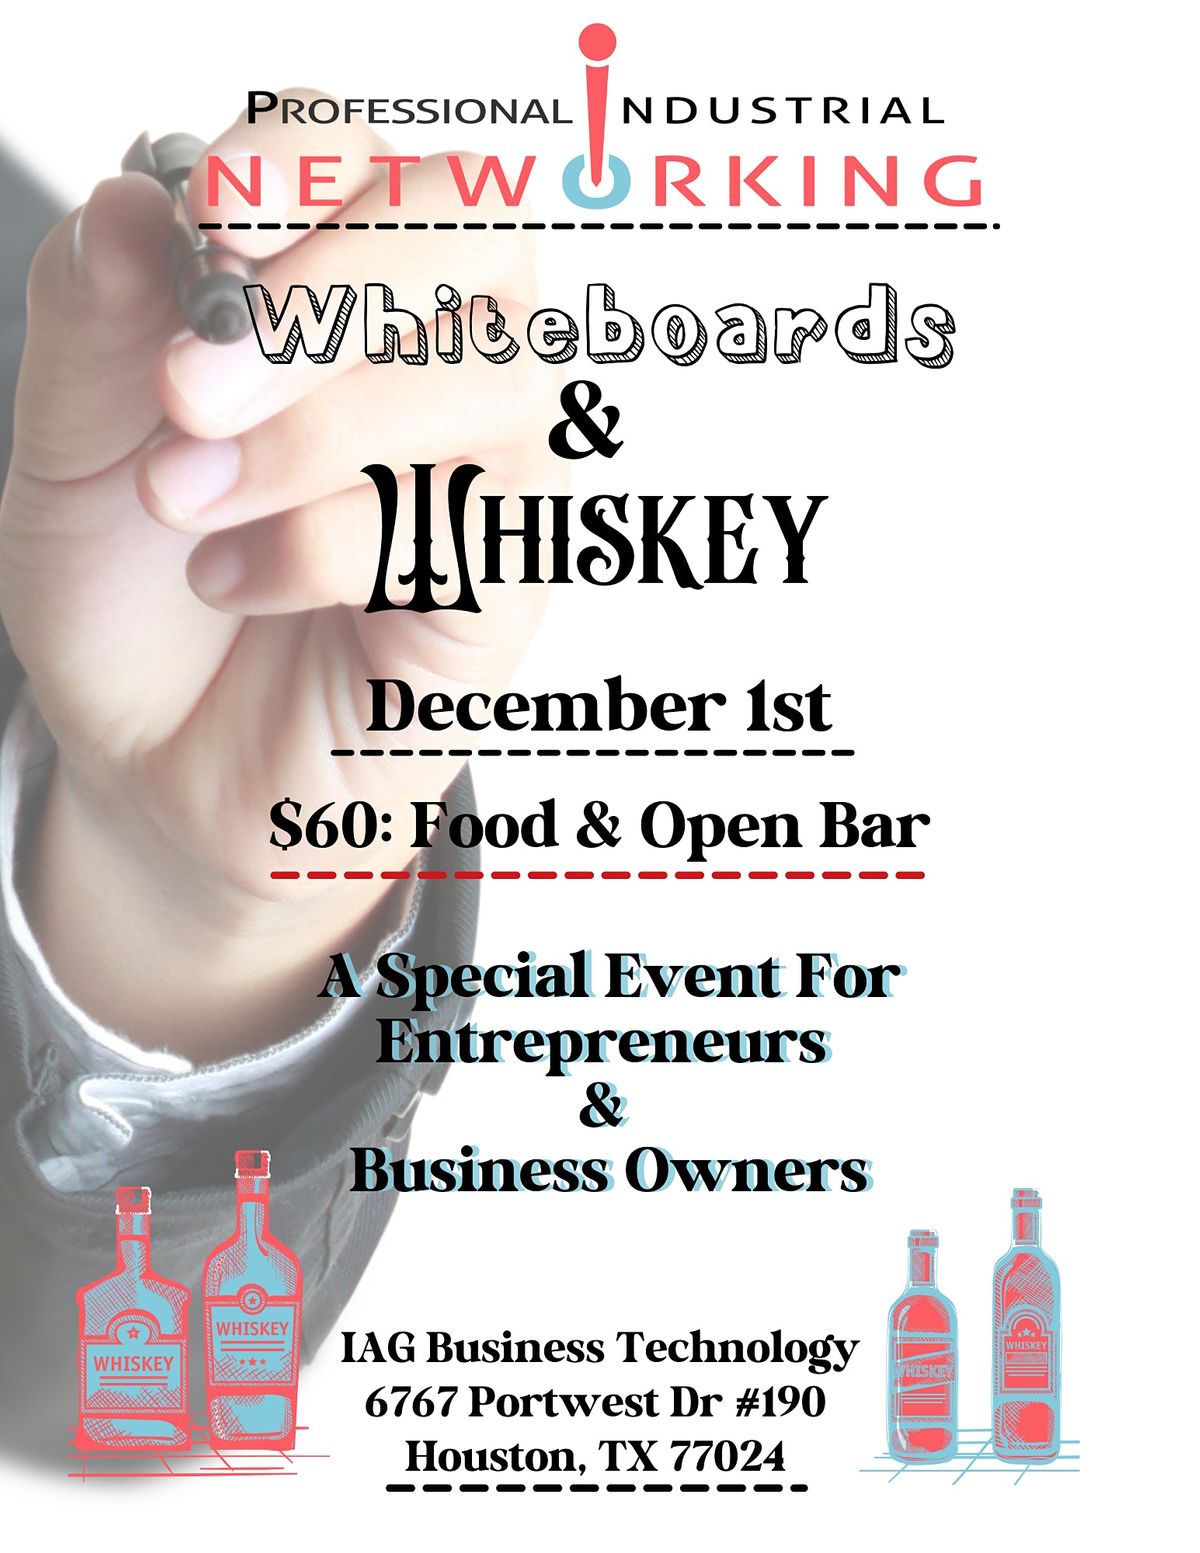 Whiteboards and Whiskey for Business Owners and Entrepreneurs July 6th